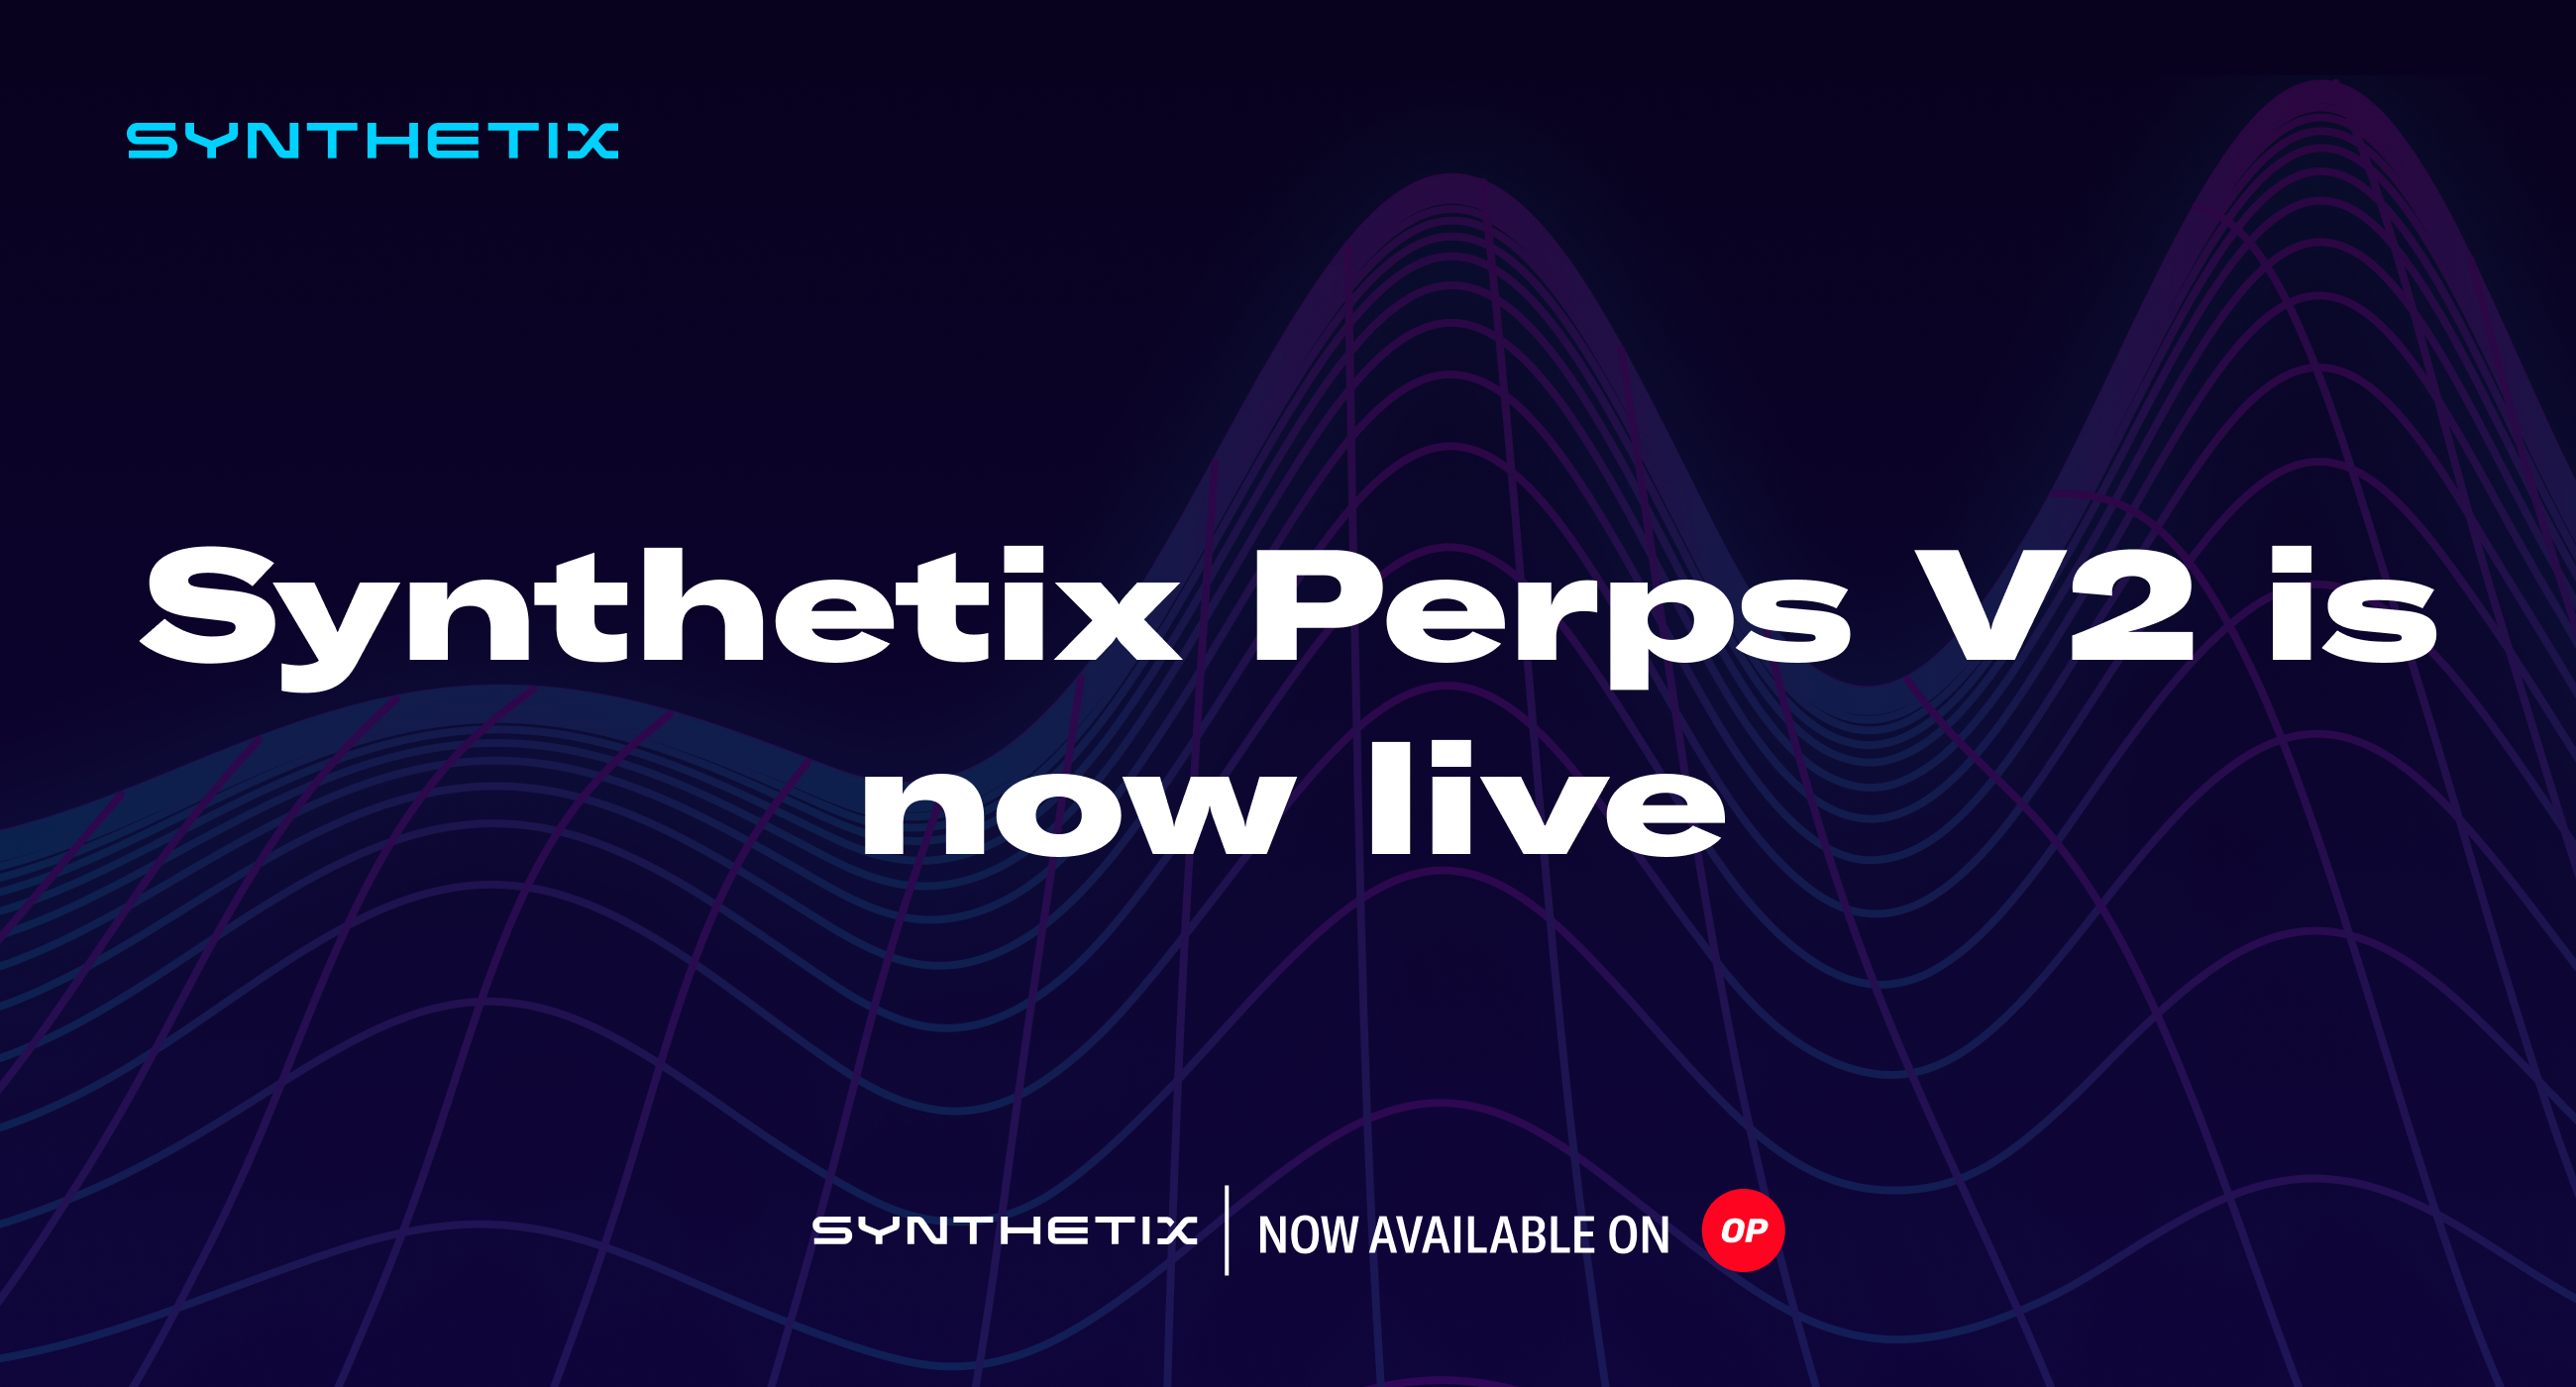 Synthetix Perps V2 is now live